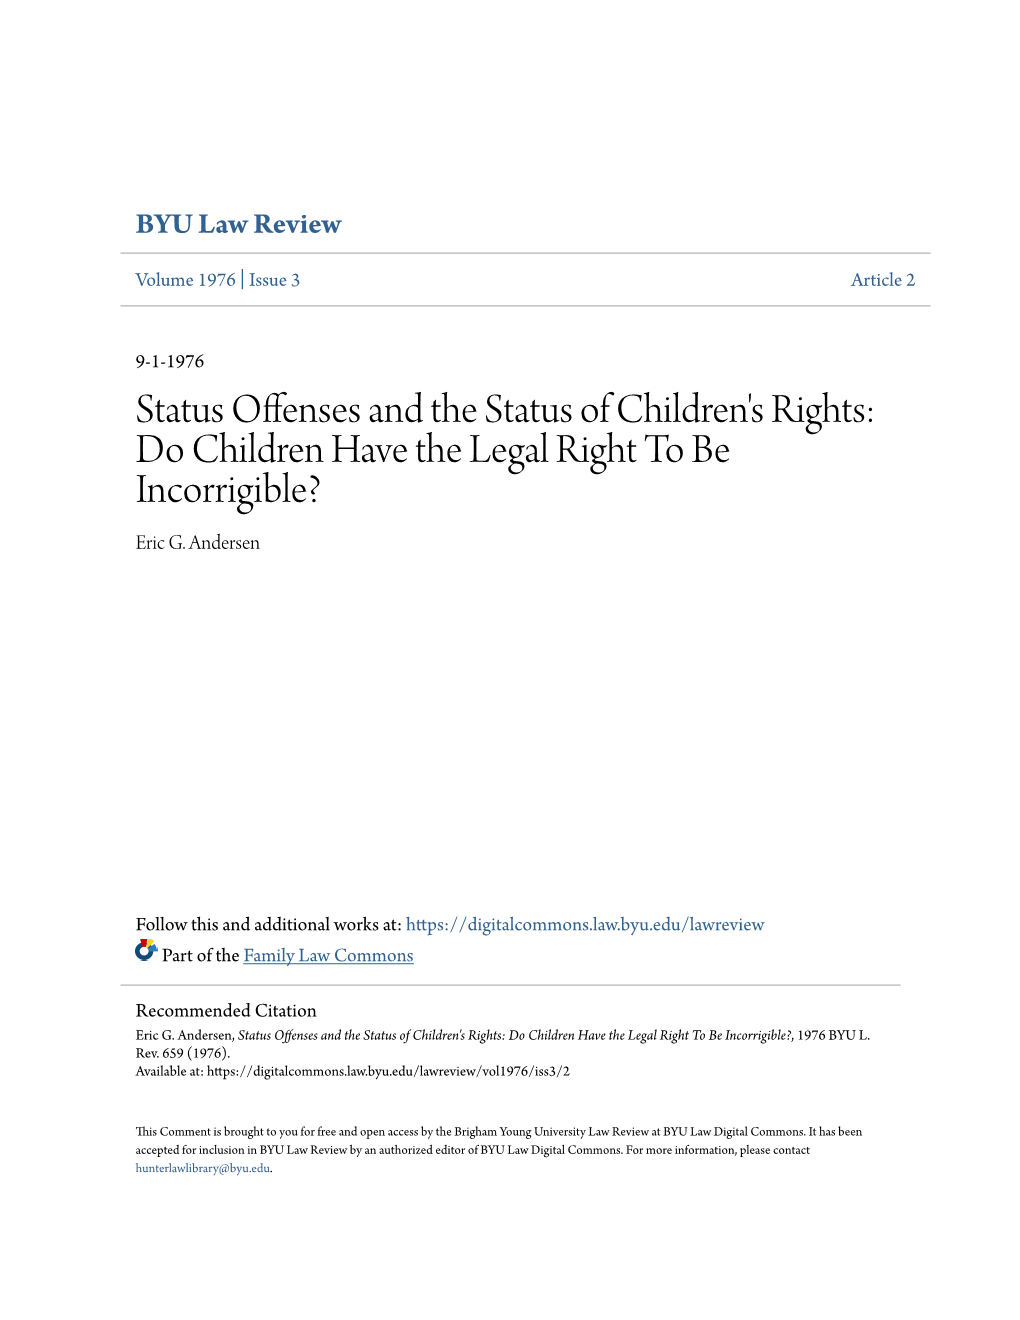 Status Offenses and the Status of Children's Rights: Do Children Have the Legal Right to Be Incorrigible? Eric G